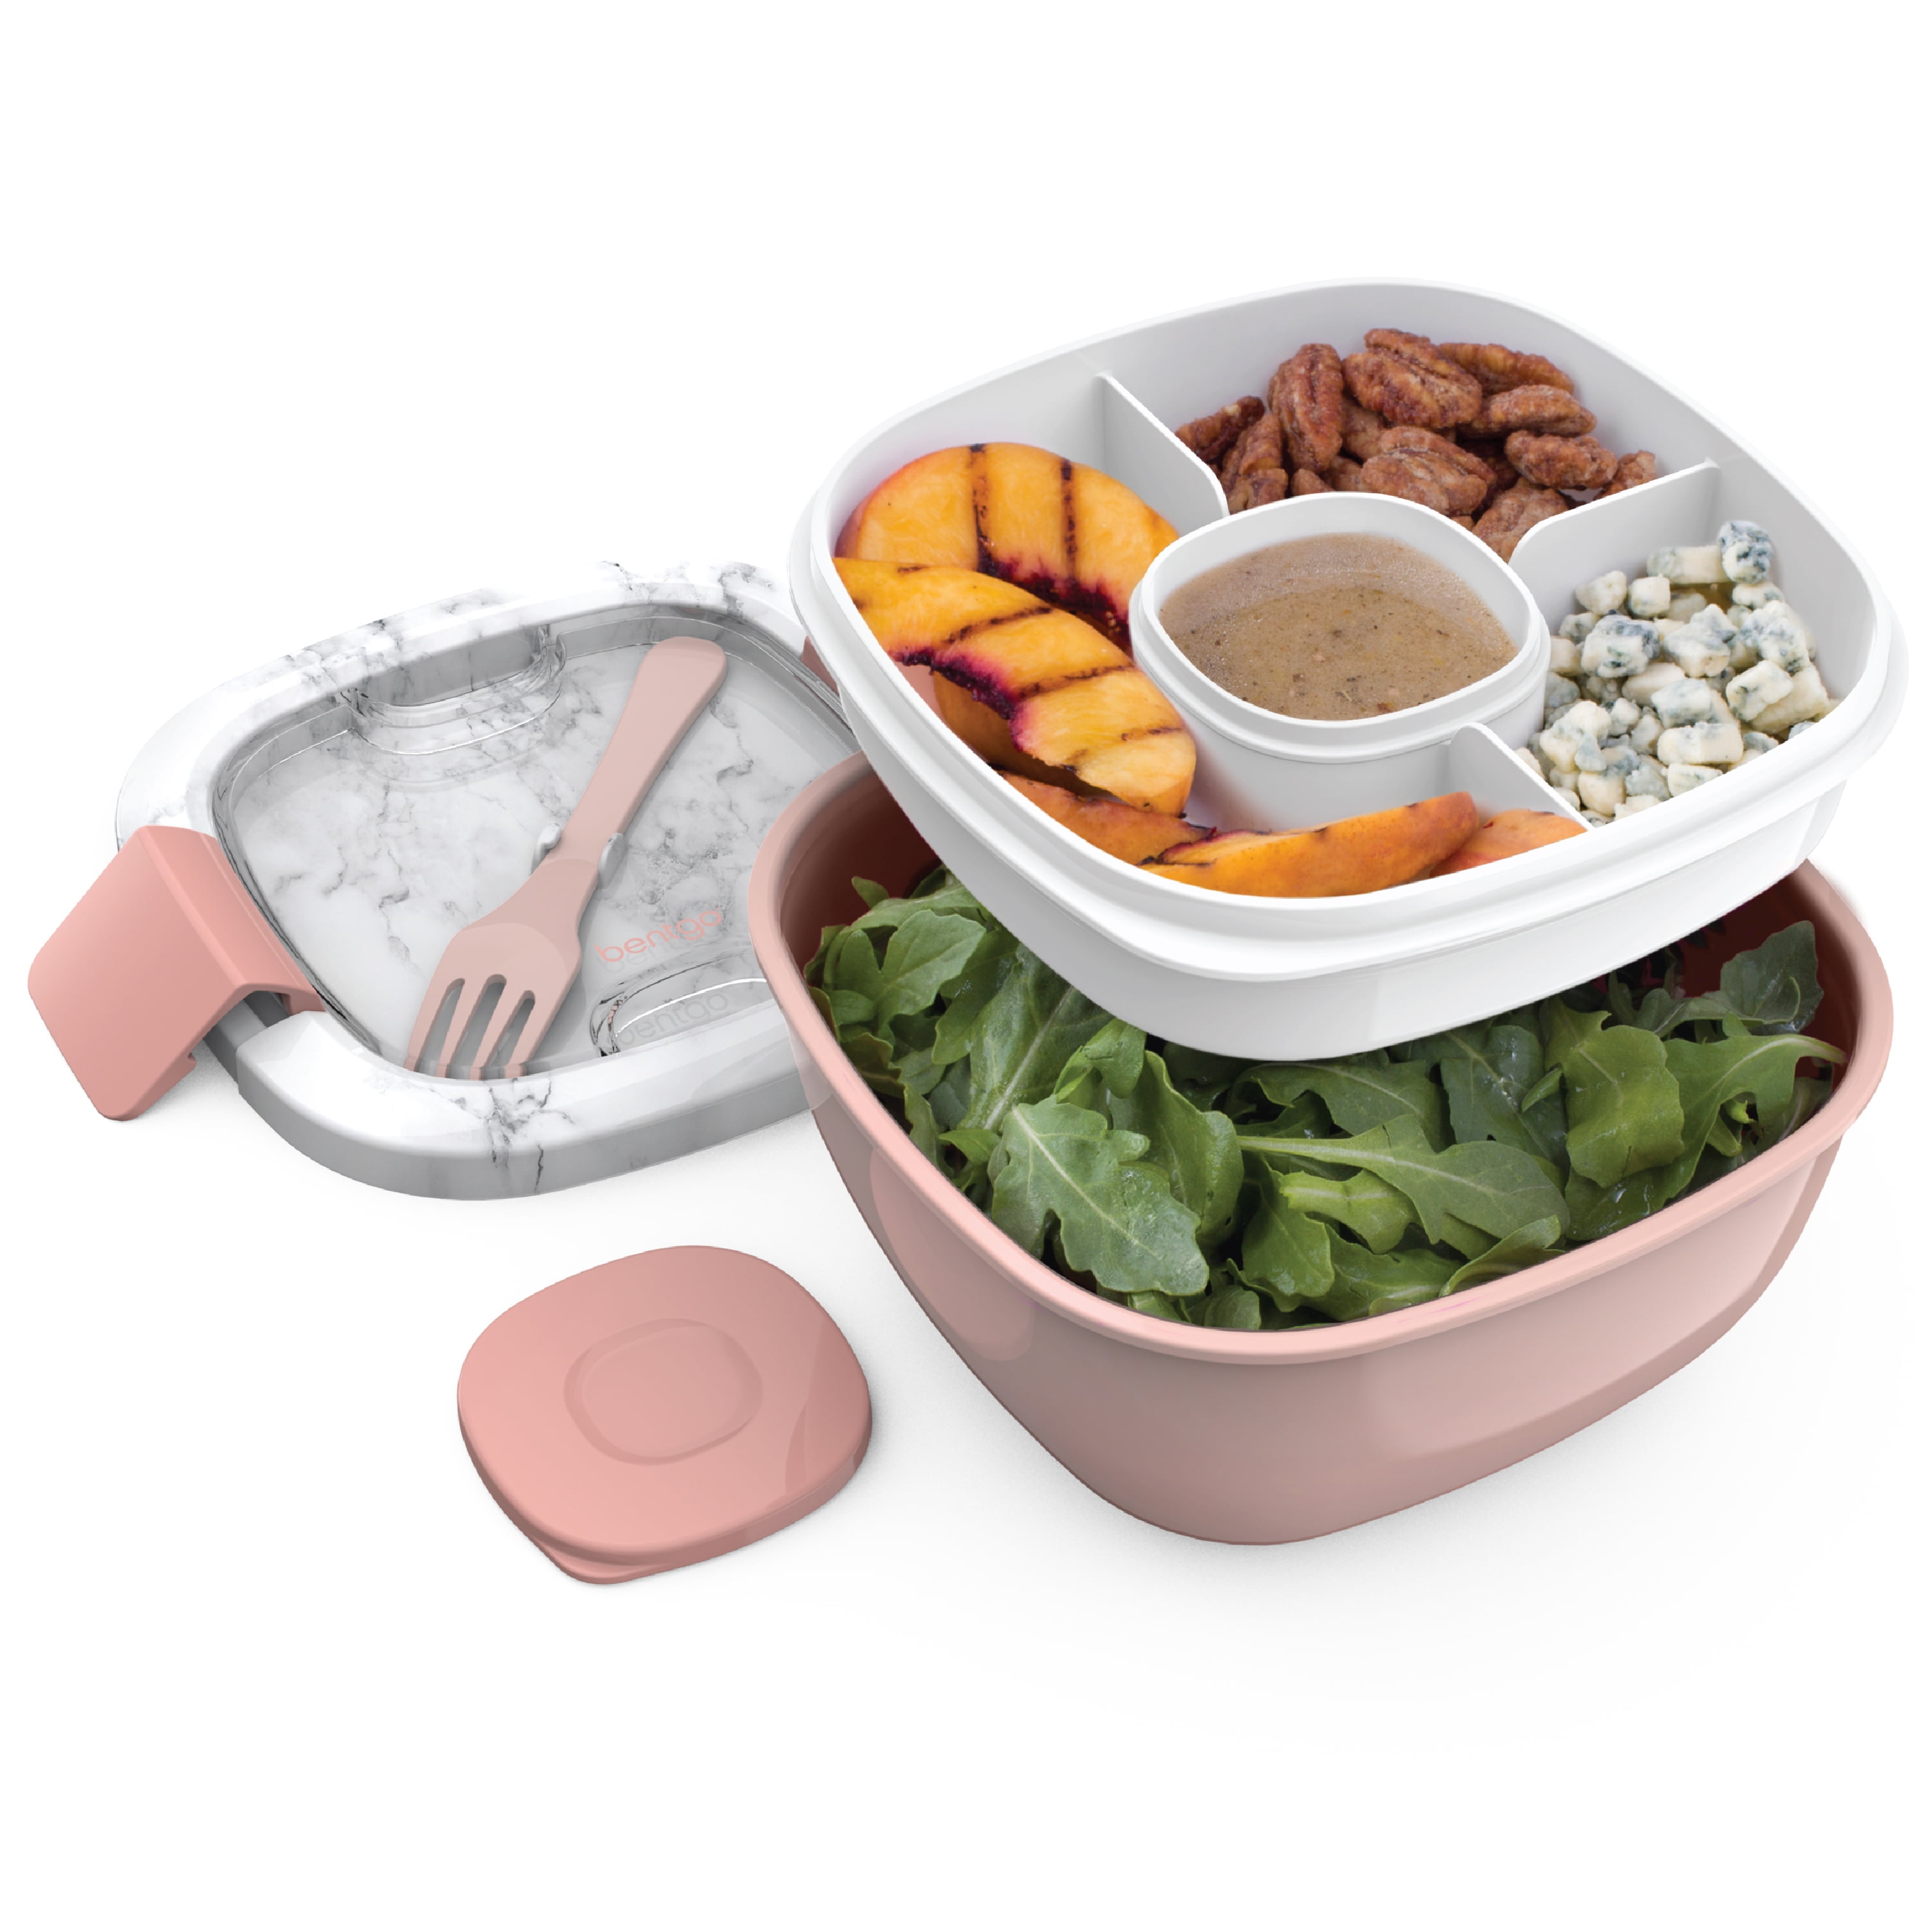 Bentgo® Glass All-in-One Salad Container - Large 61-oz Salad Bowl,  4-Compartment Bento-Style Tray fo…See more Bentgo® Glass All-in-One Salad  Container